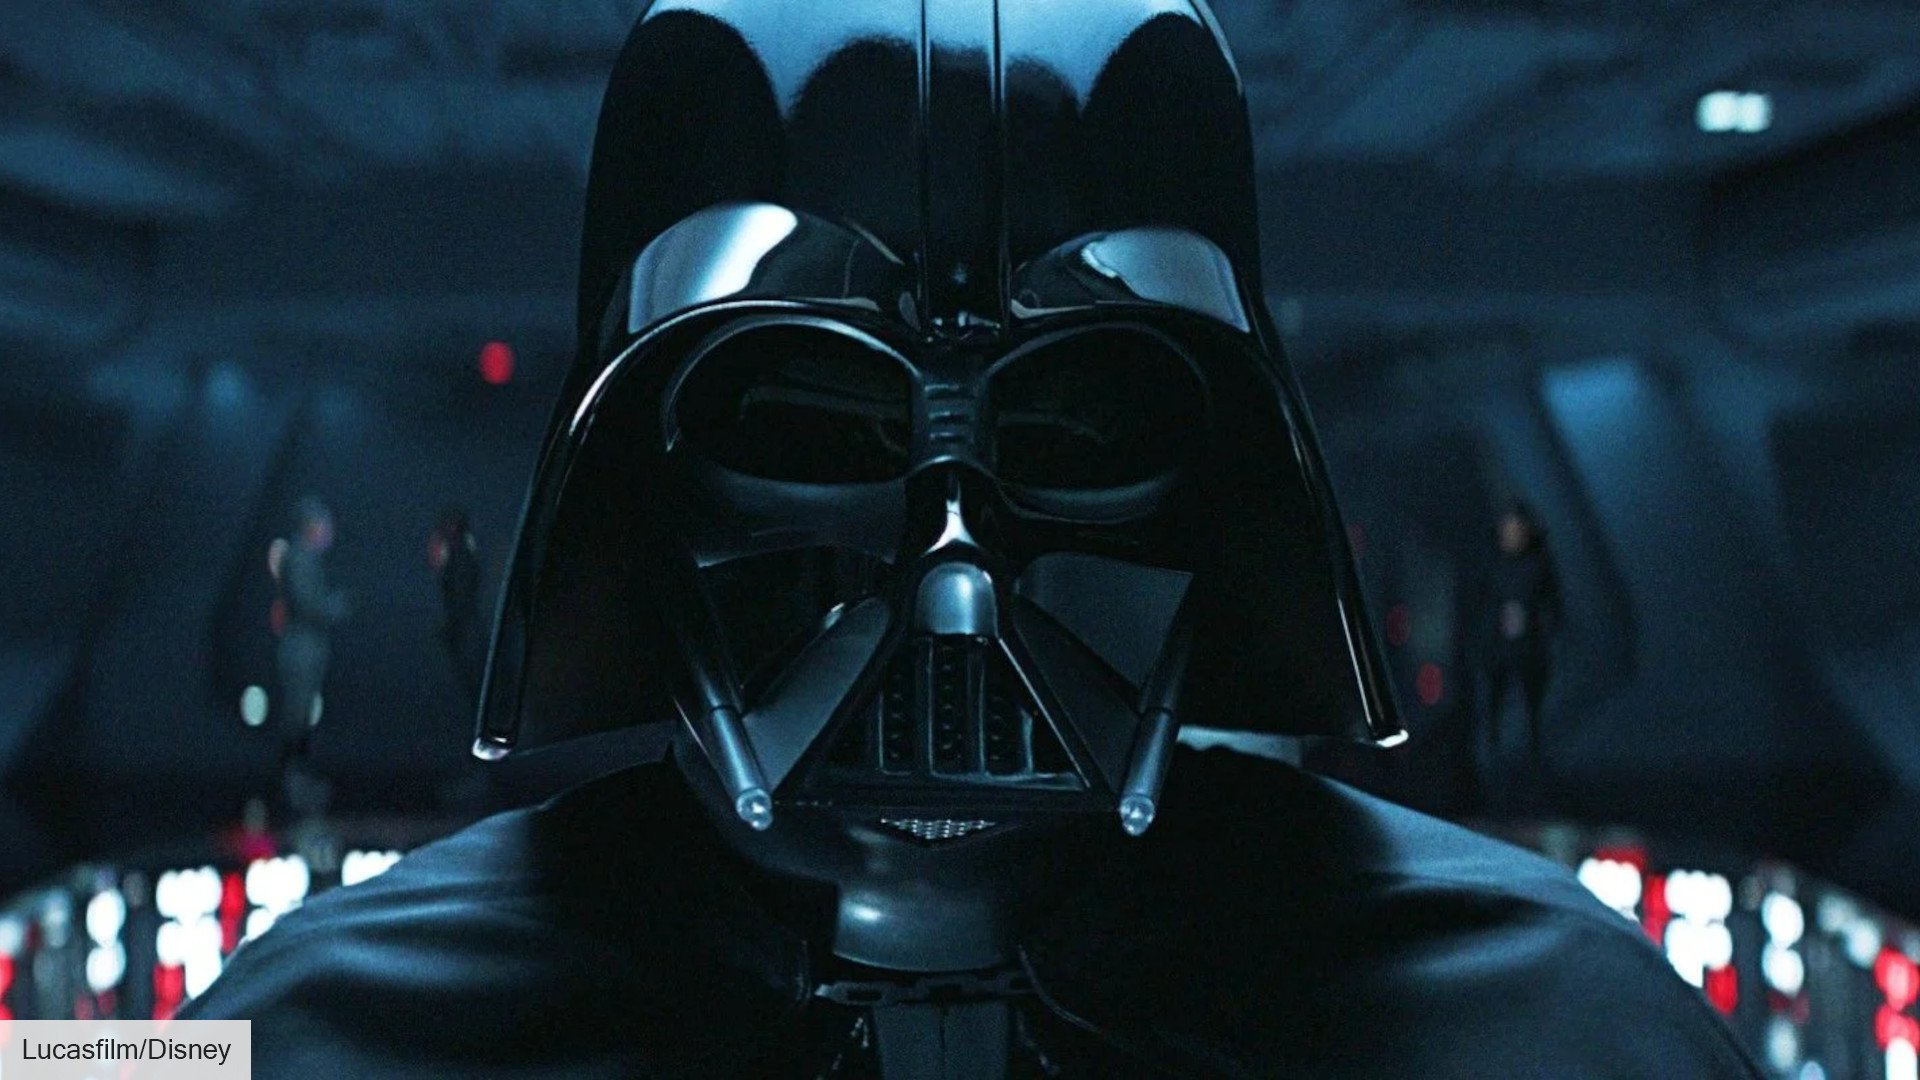 Darth Vader explained the Sith Lord’s origin and powers in Star Wars